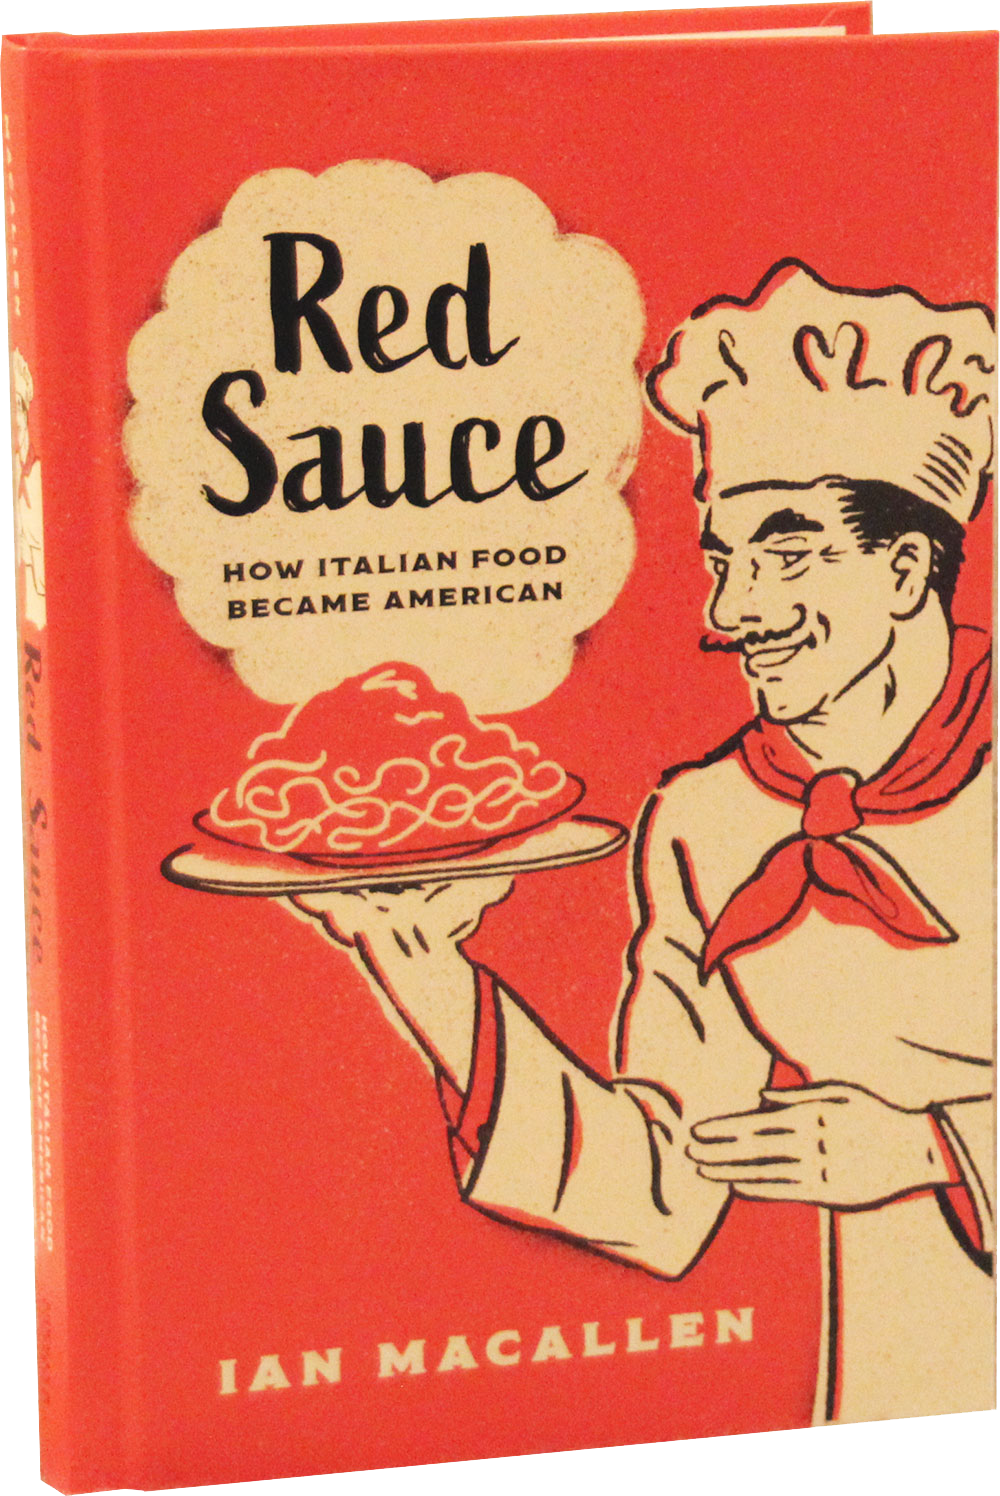 Red Sauce How Italian food Became American, the red cover features a chef holding a plate of spaghetti